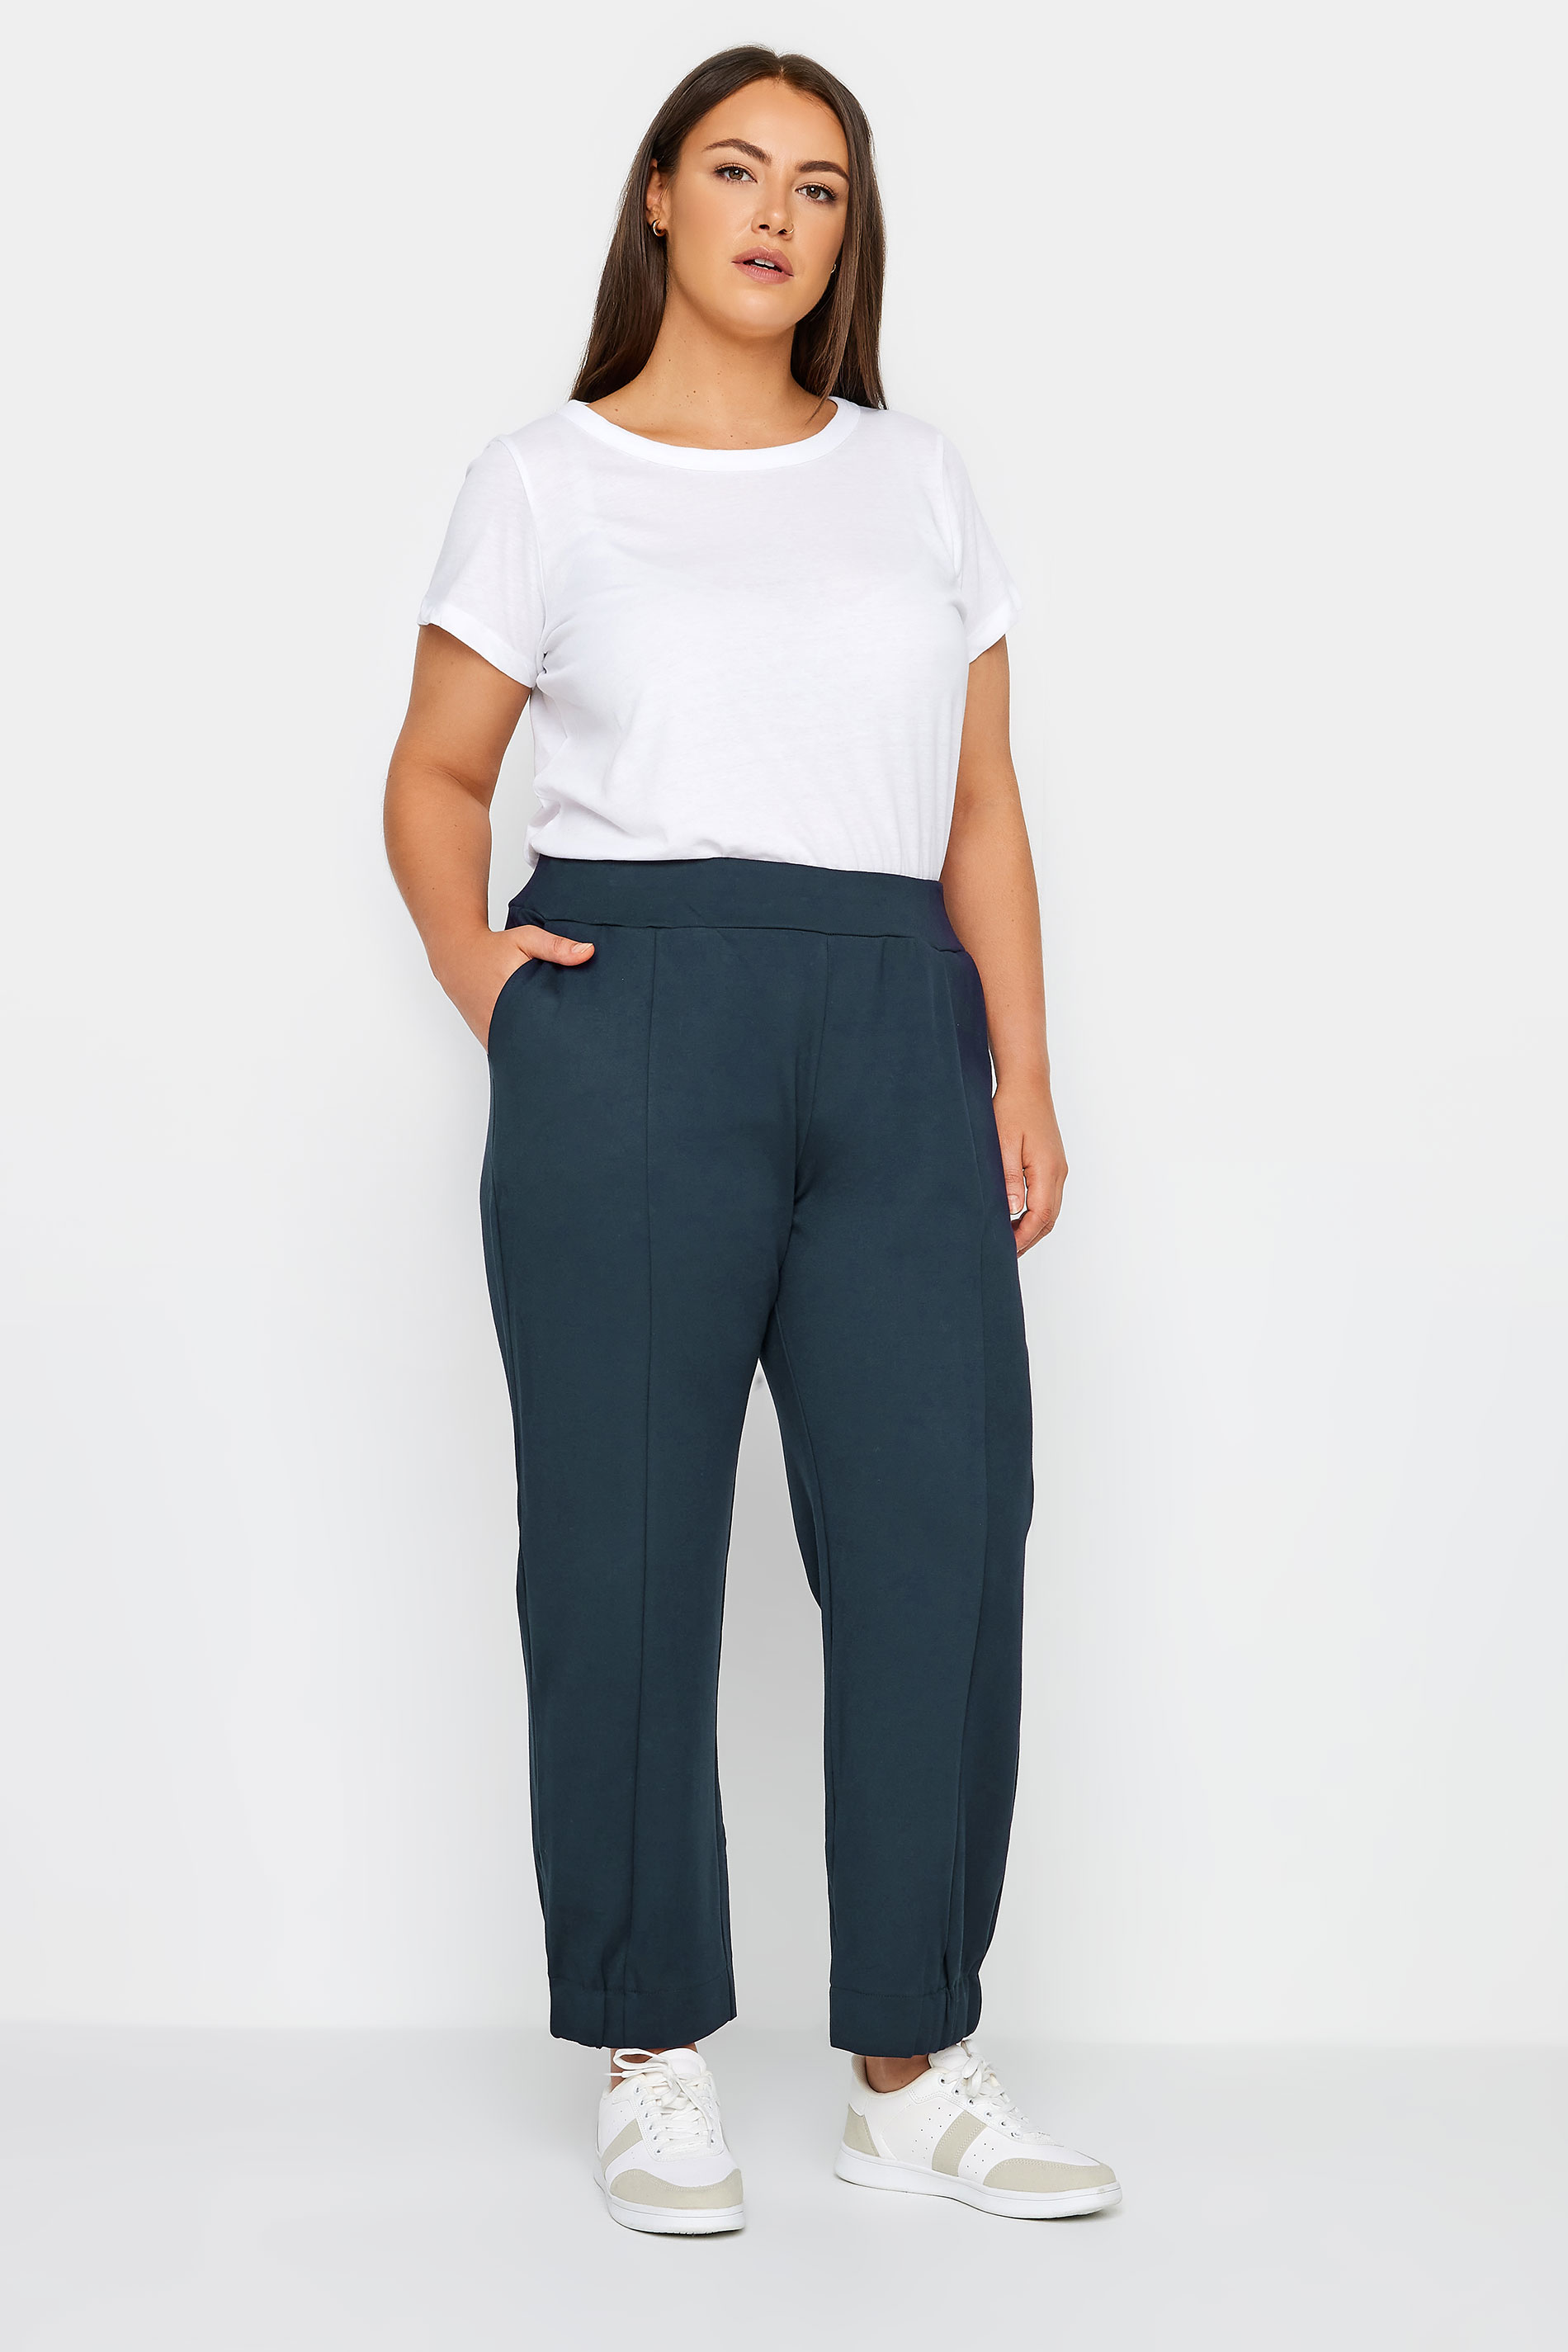 City Chic Navy Blue Ponte Trousers 2